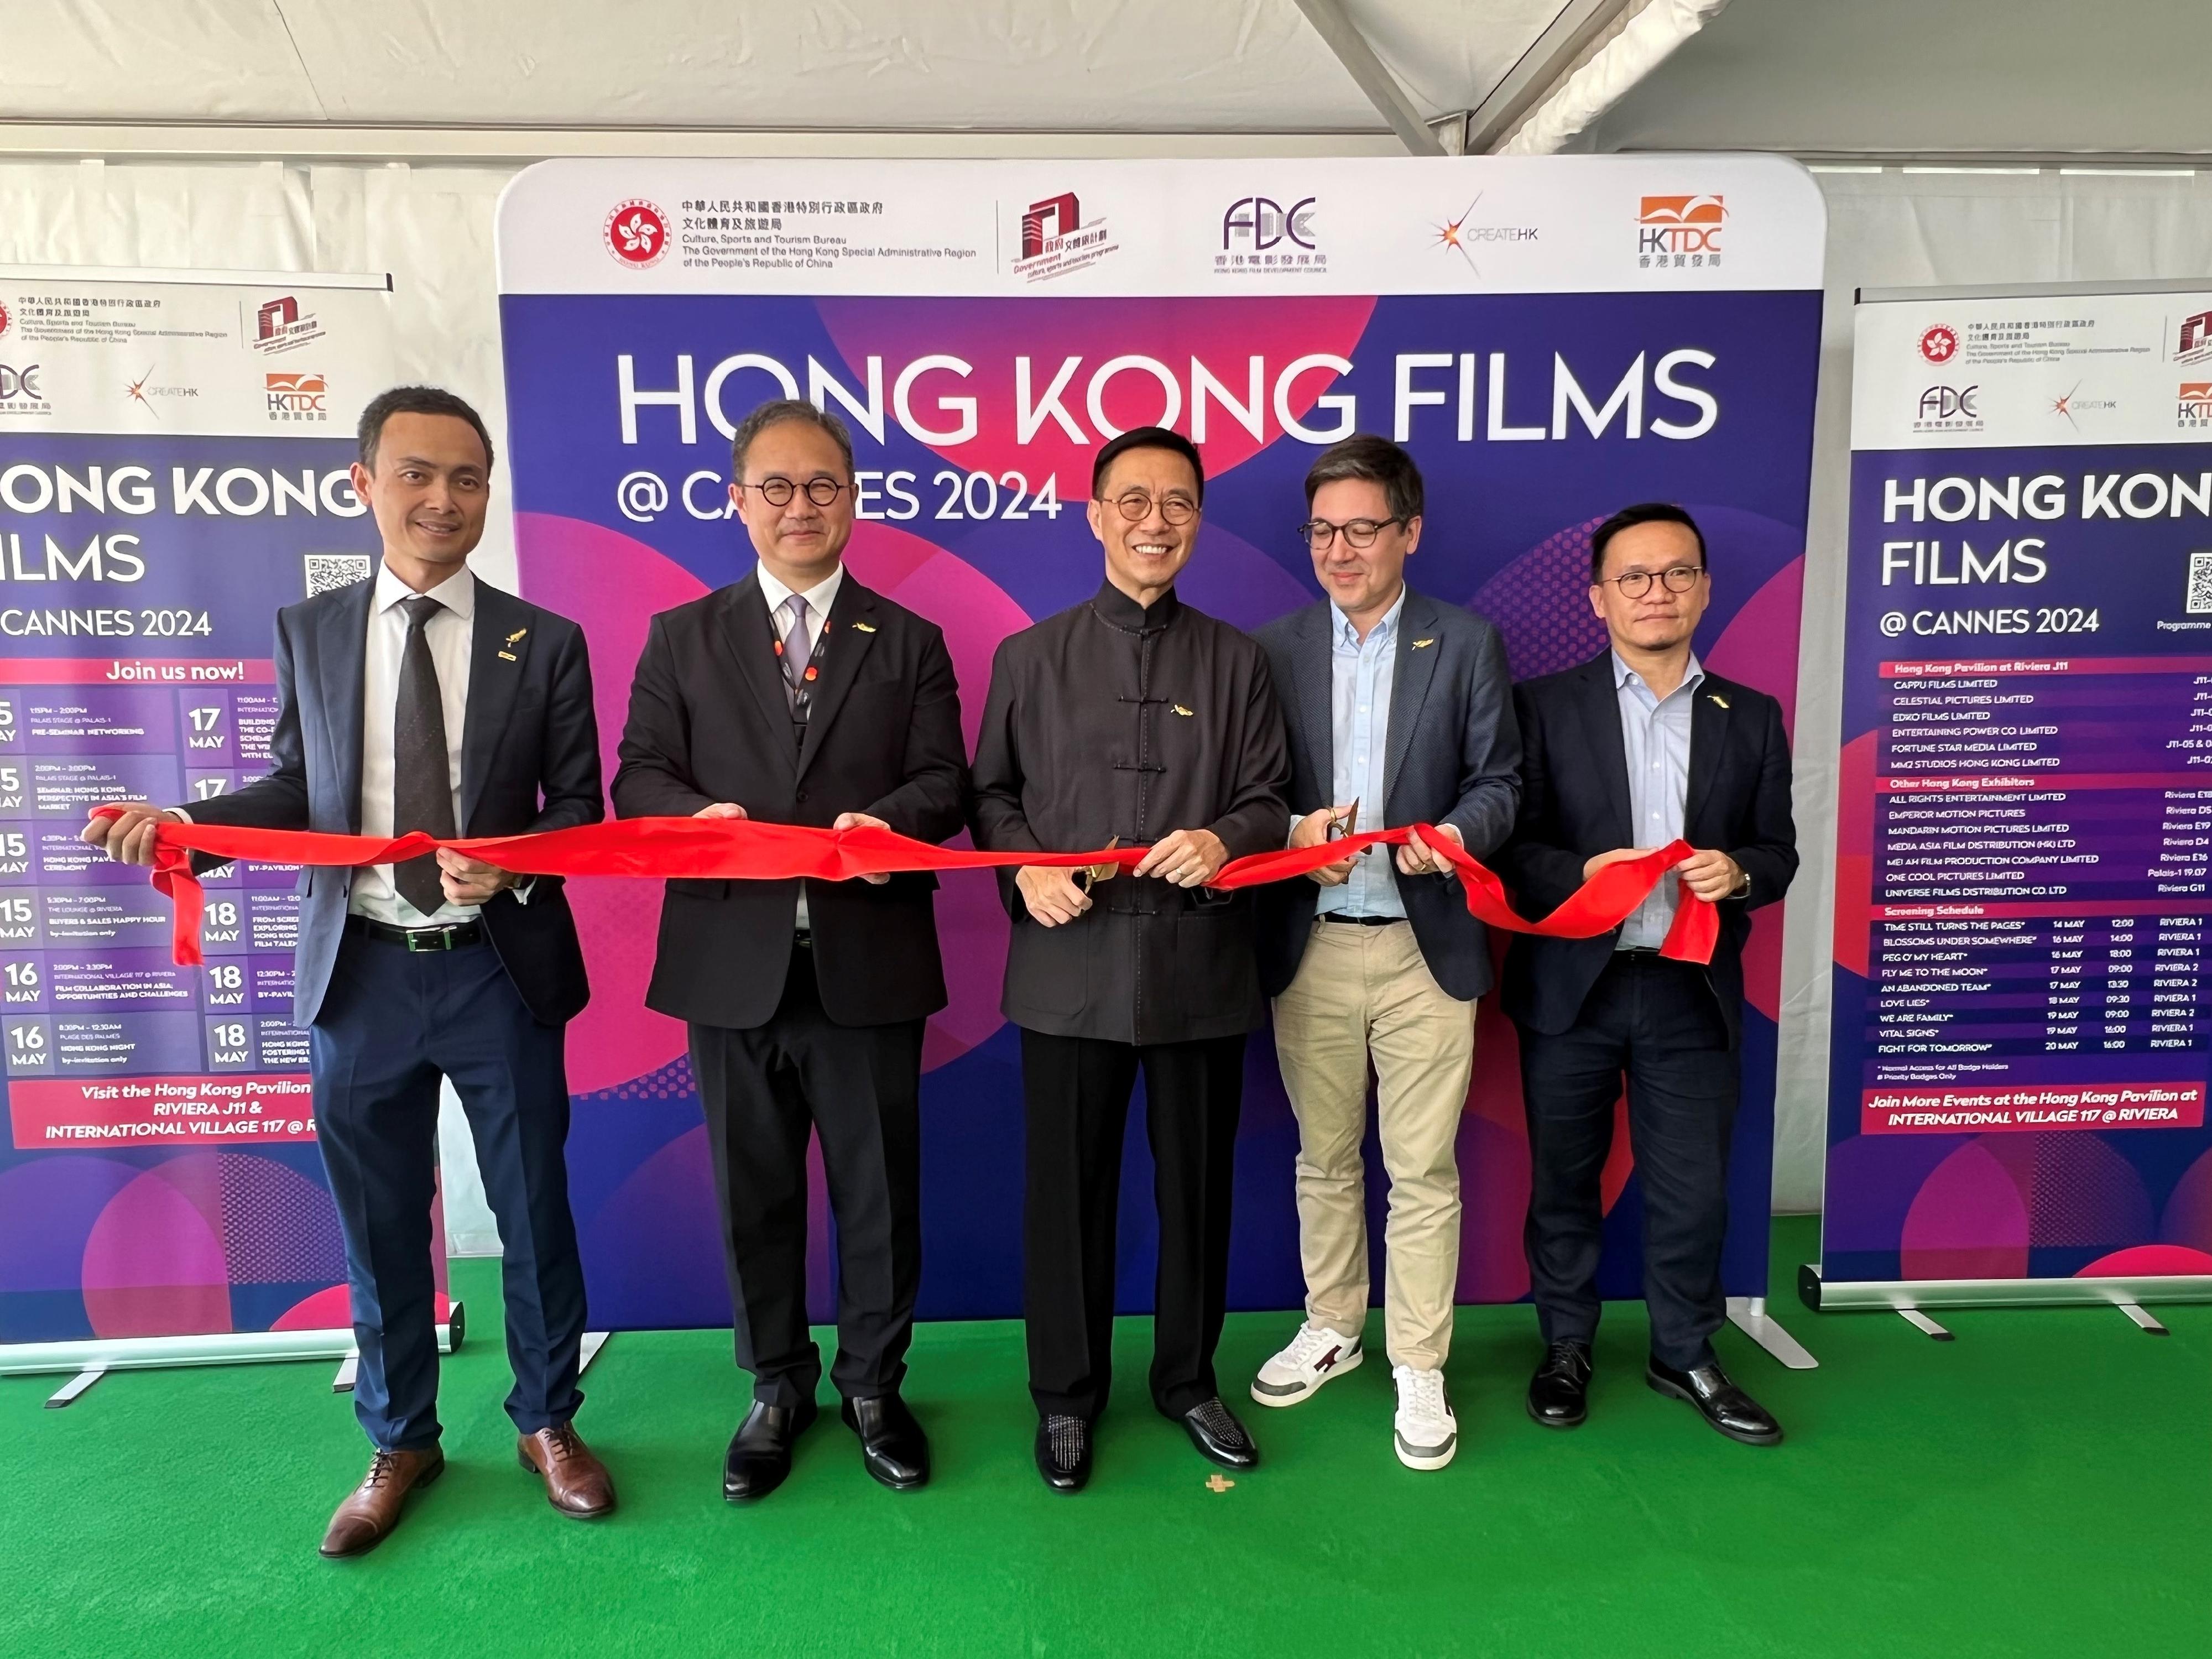 The Secretary for Culture, Sports and Tourism, Mr Kevin Yeung, led a Hong Kong film industry delegation to the 77th Cannes Film Festival in France. On May 15 (Cannes time), Mr Yeung (centre) officiated at the opening ceremony of the Hong Kong Pavilion at the Cannes Film Market. The Permanent Secretary for Culture, Sports and Tourism, Mr Joe Wong (second left), and Assistant Head of Create Hong Kong Mr Gary Mak (first right), also attended.